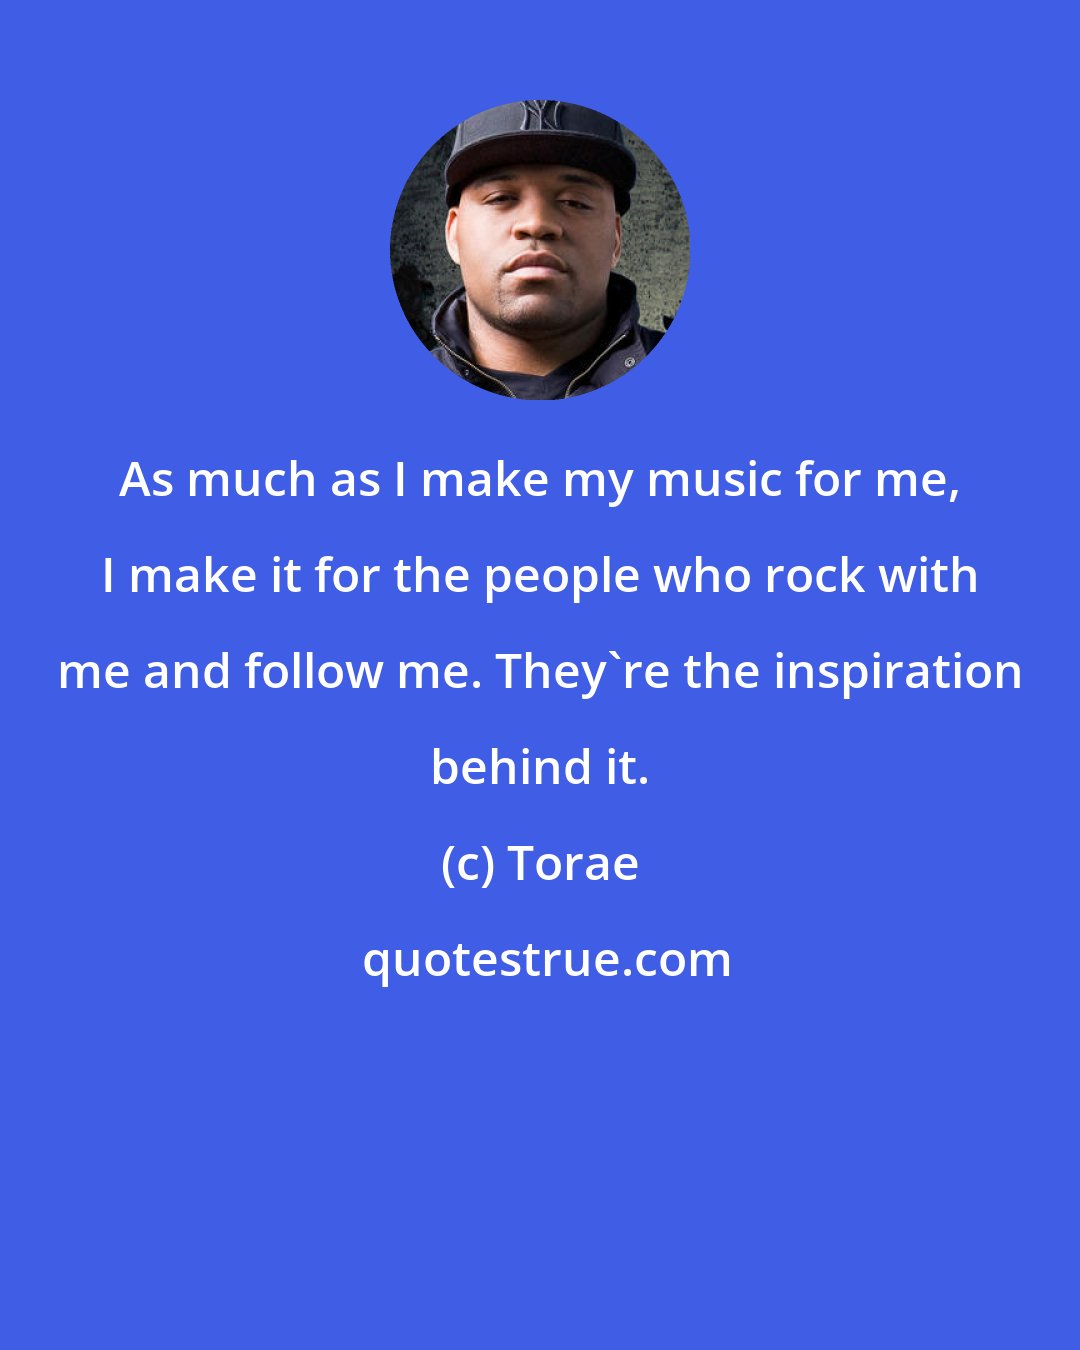 Torae: As much as I make my music for me, I make it for the people who rock with me and follow me. They're the inspiration behind it.